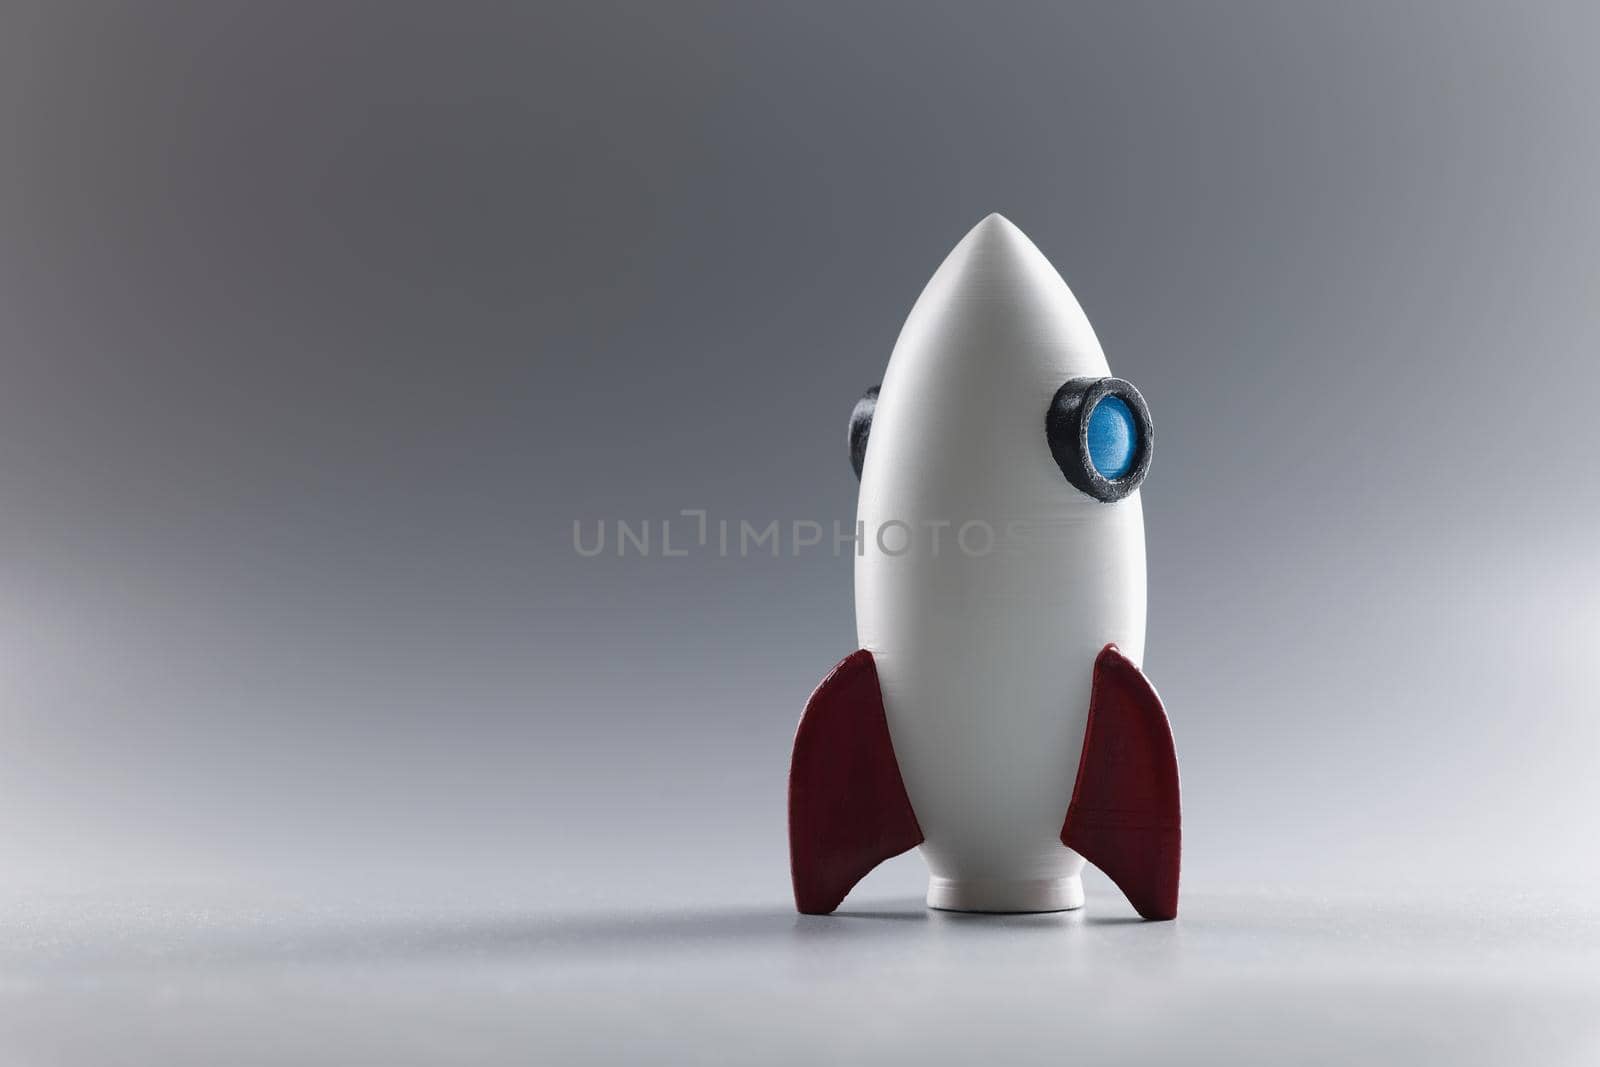 Close-up of rocket toy model stand on grey surface, rocketship as symbol for business project or startup. Success, growth, development concept. Copy space